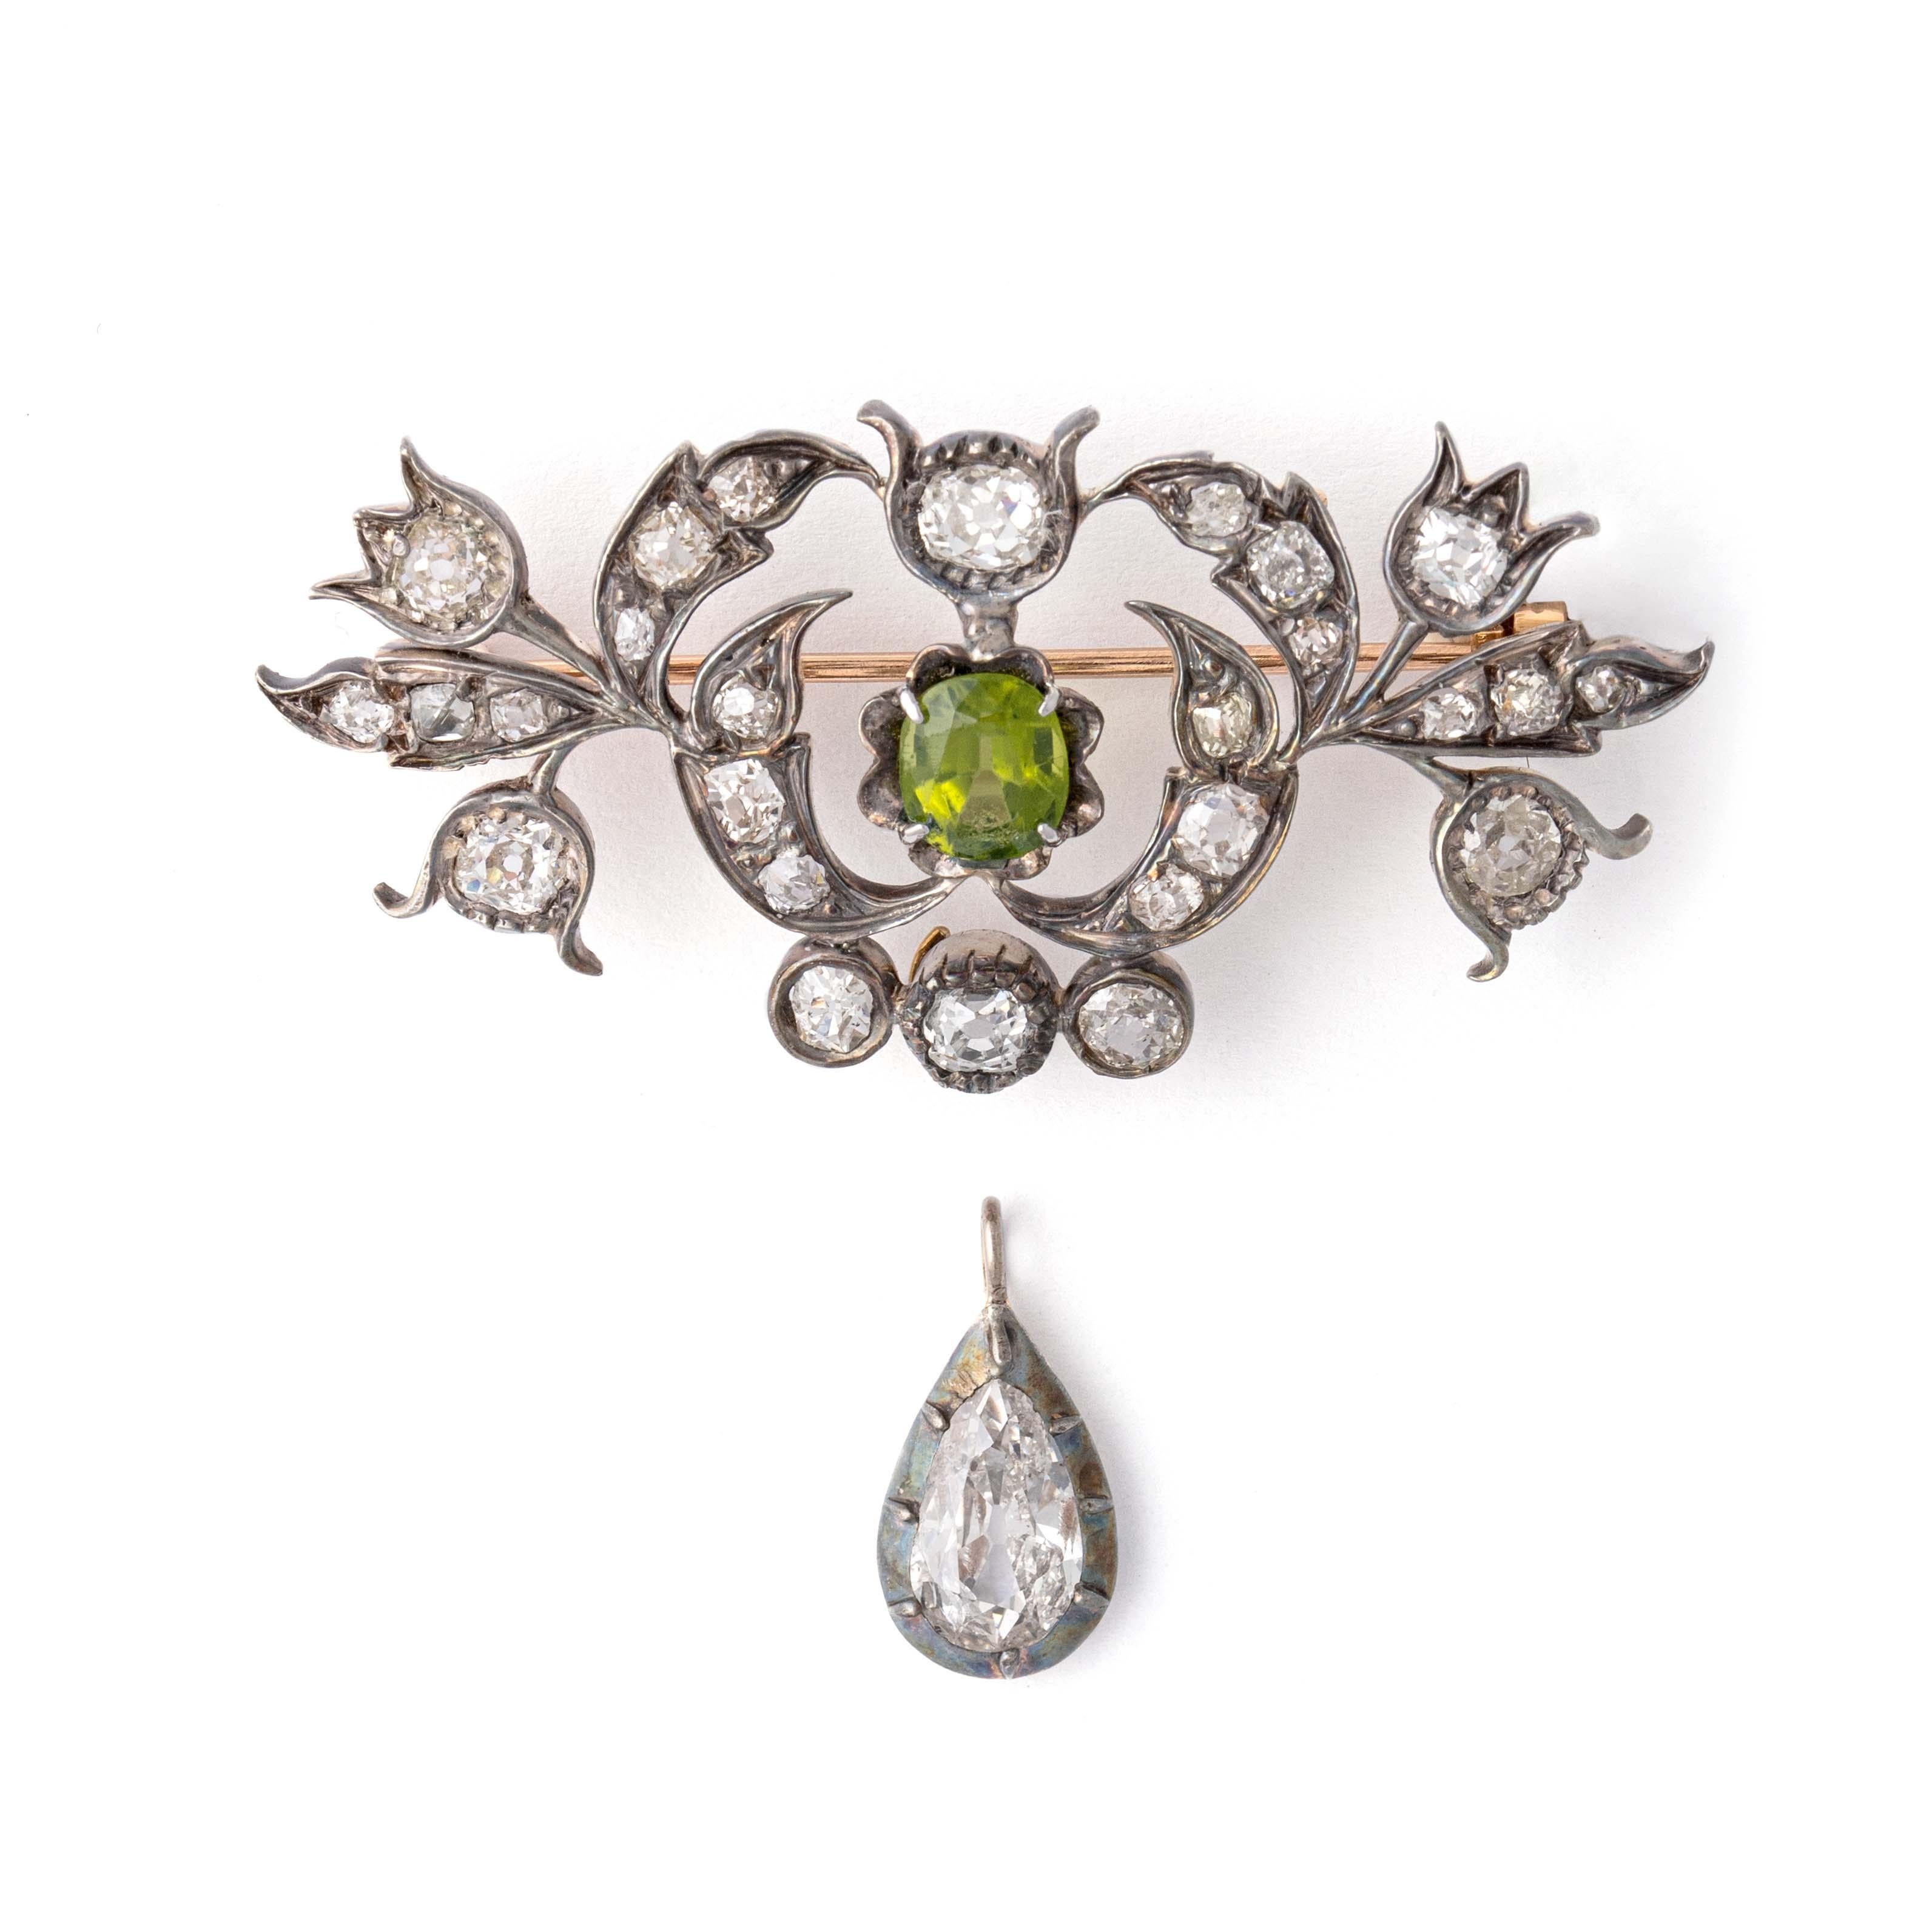 Antique Diamond and Peridot Brooch Pendant Late 19th Century For Sale 4